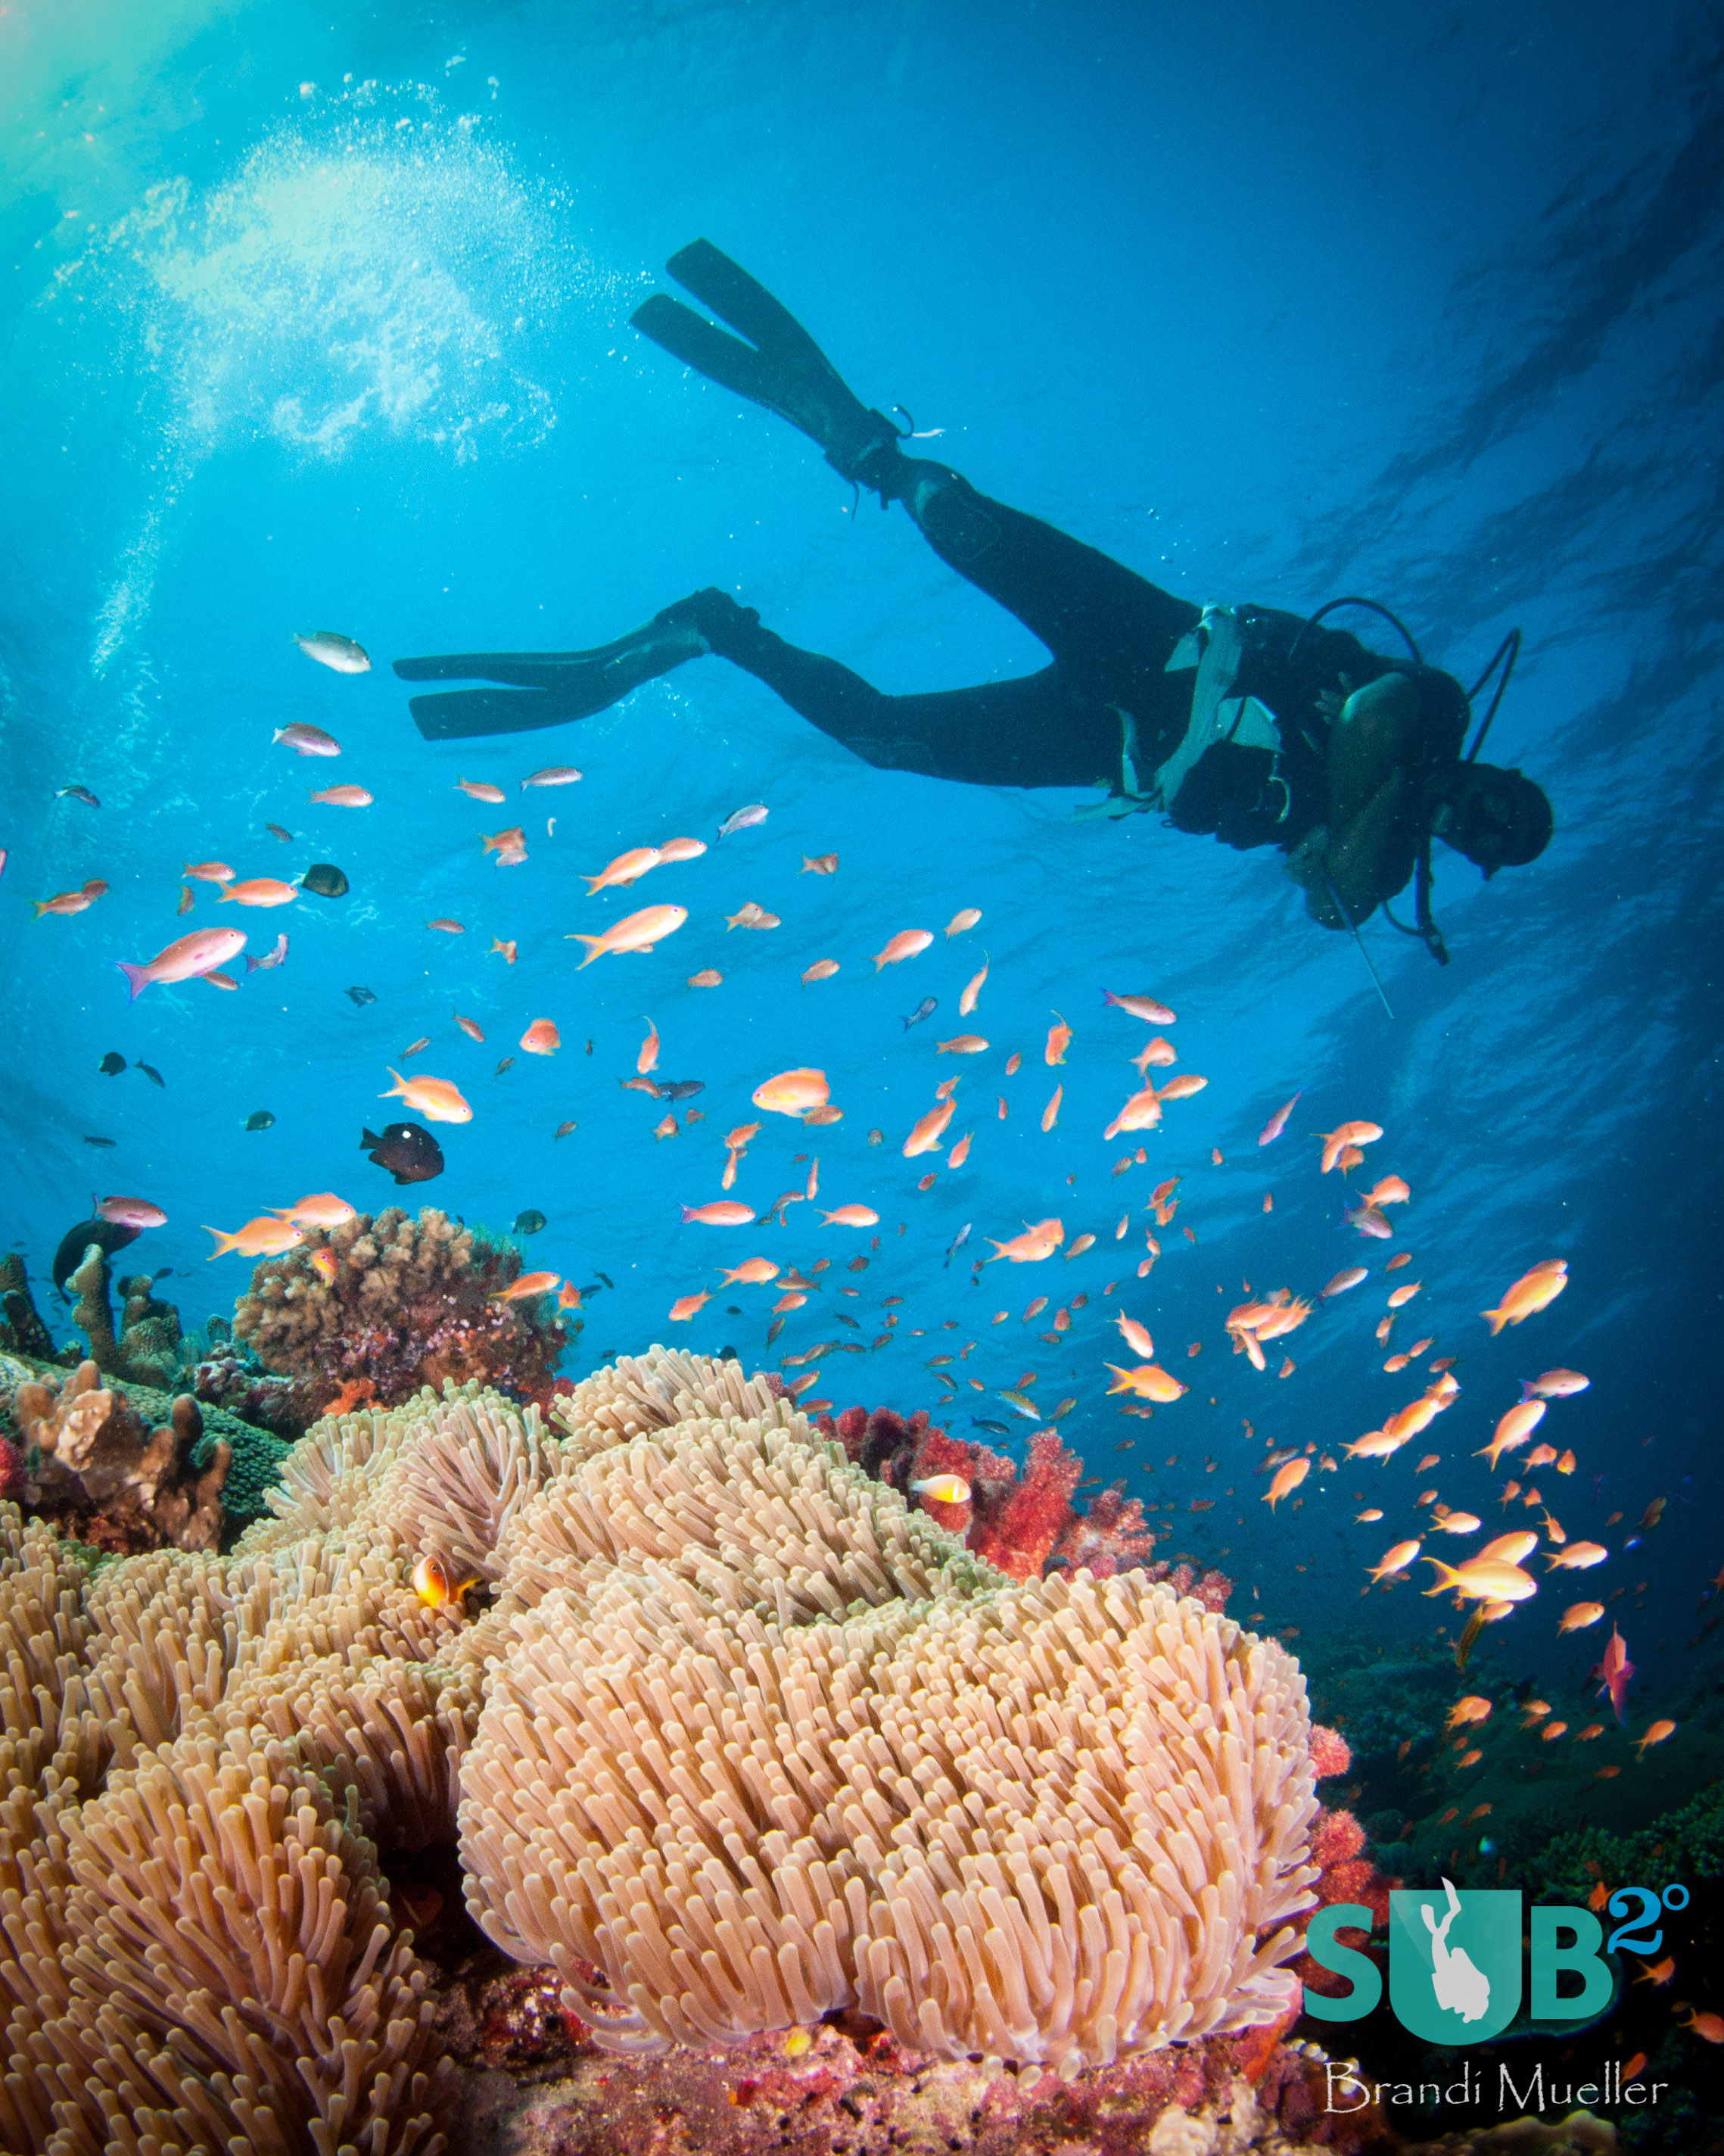 Diver and the Fiji Reef